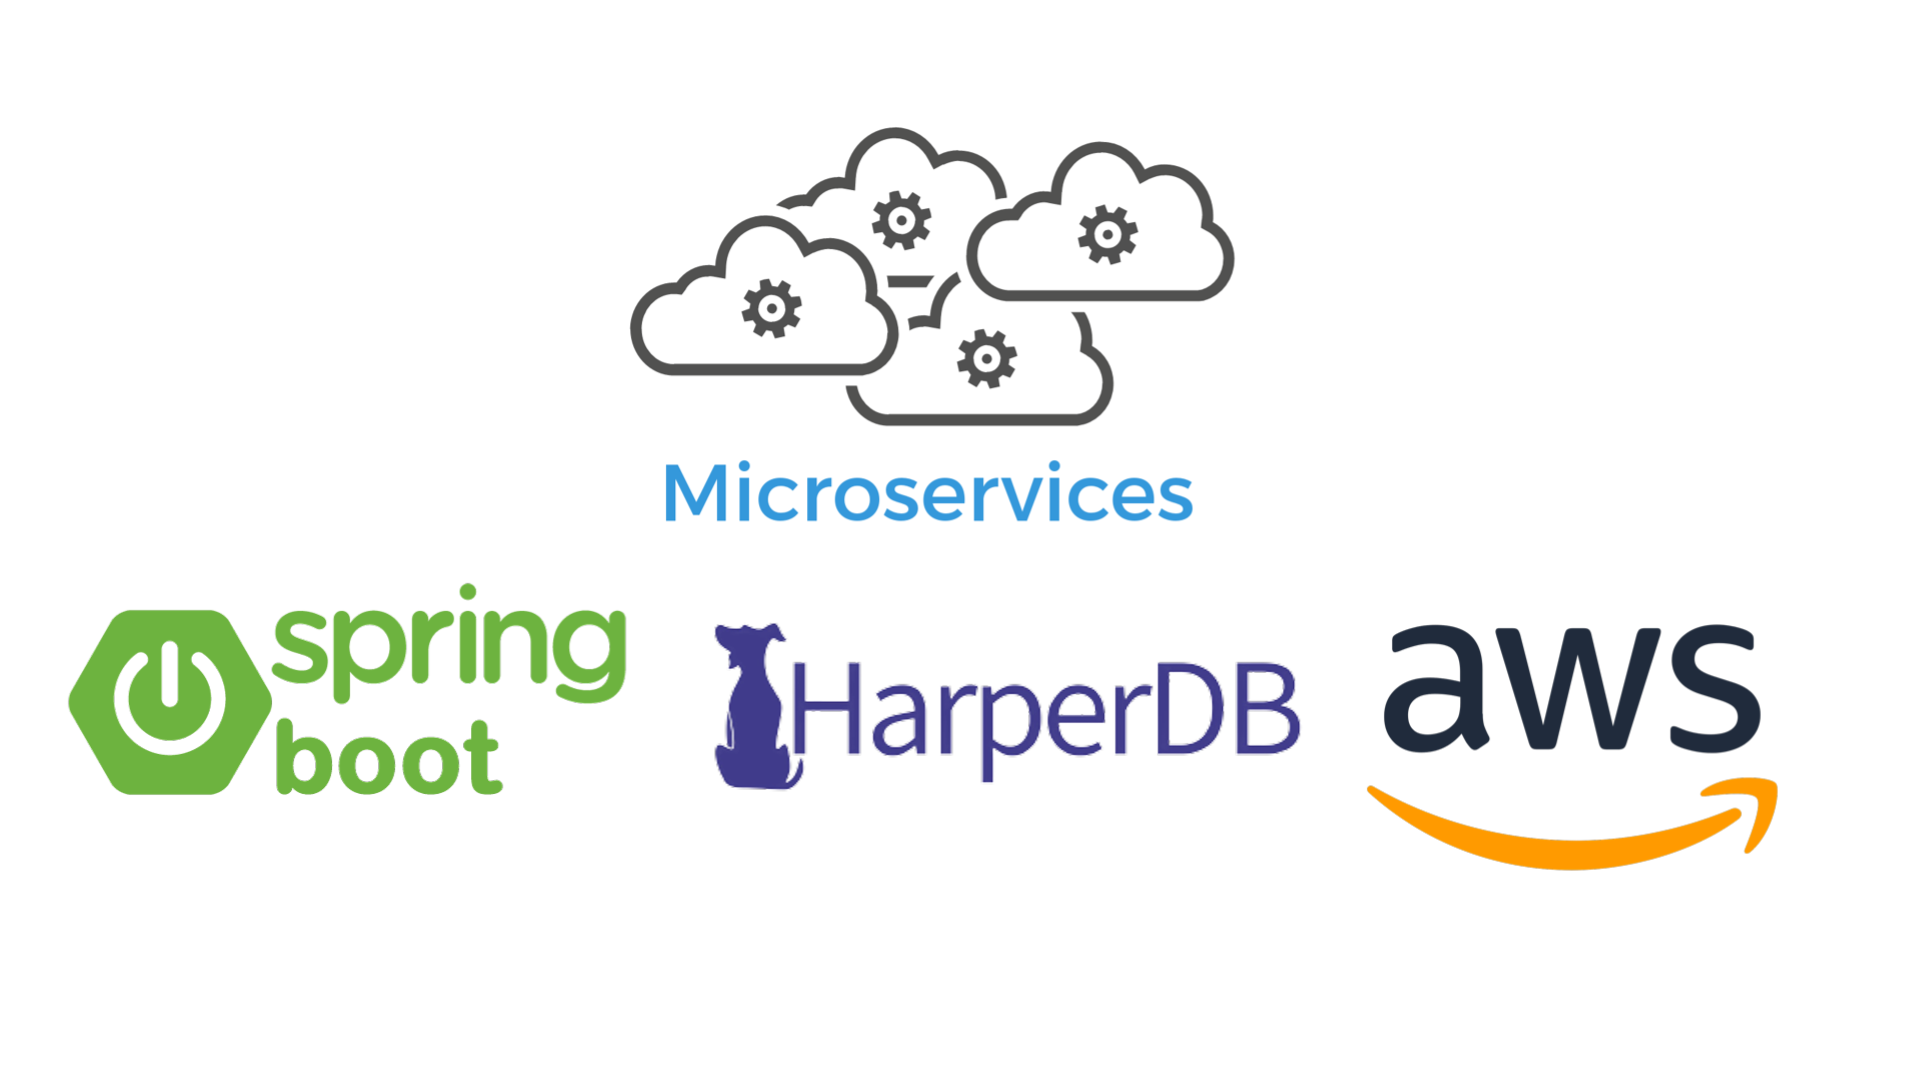 Microservices with Spring Boot. Microservices Overview